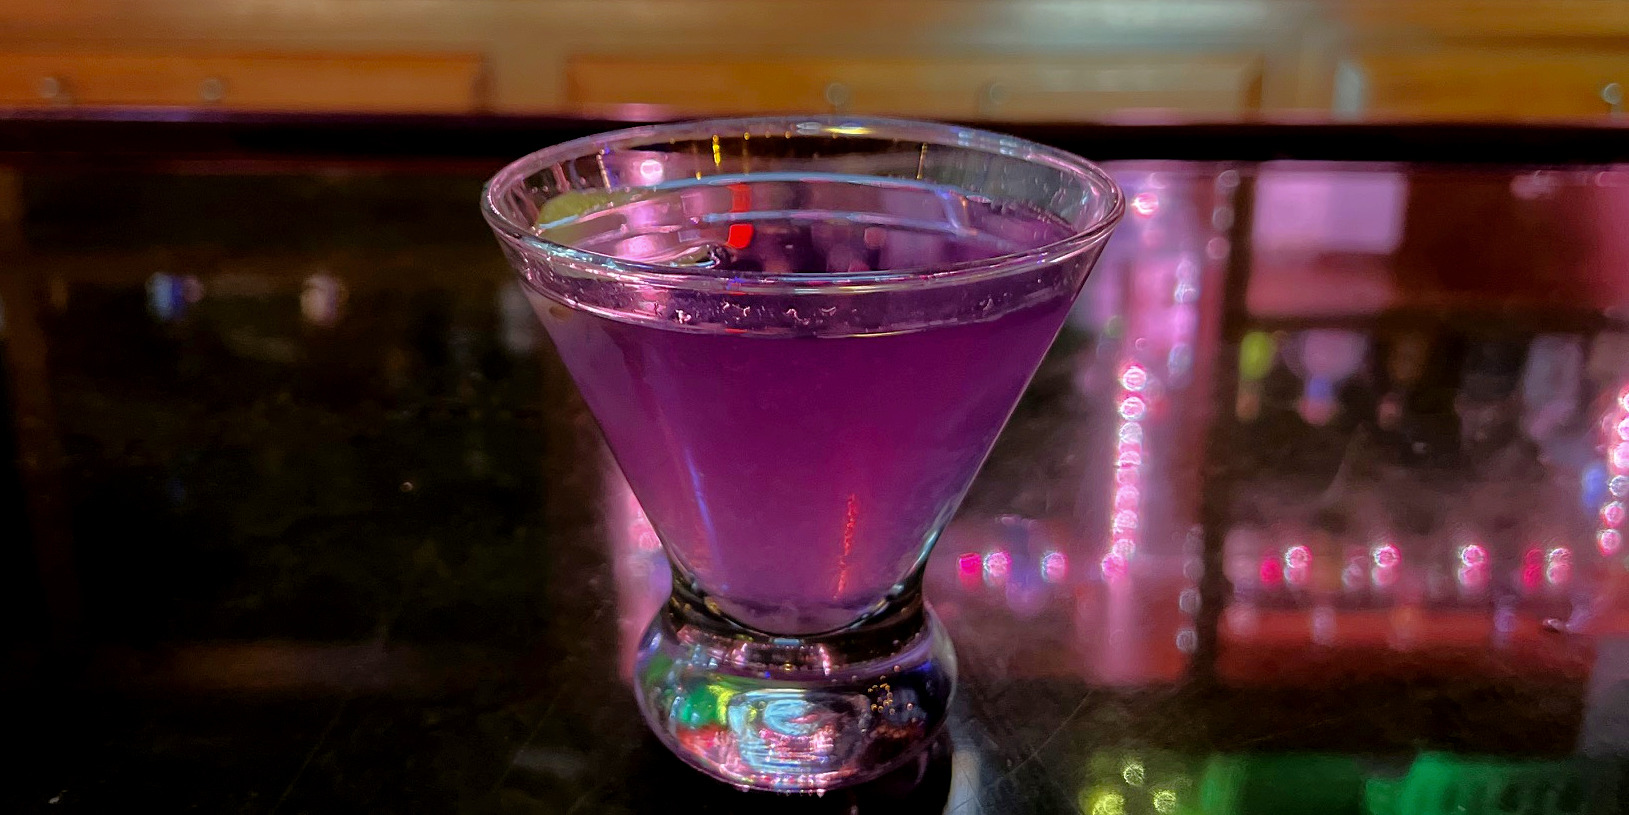 A purple cocktail is on the bar at Bentley's Pub in Downtown Champaign, Illinois. Photo by Alyssa Buckley.